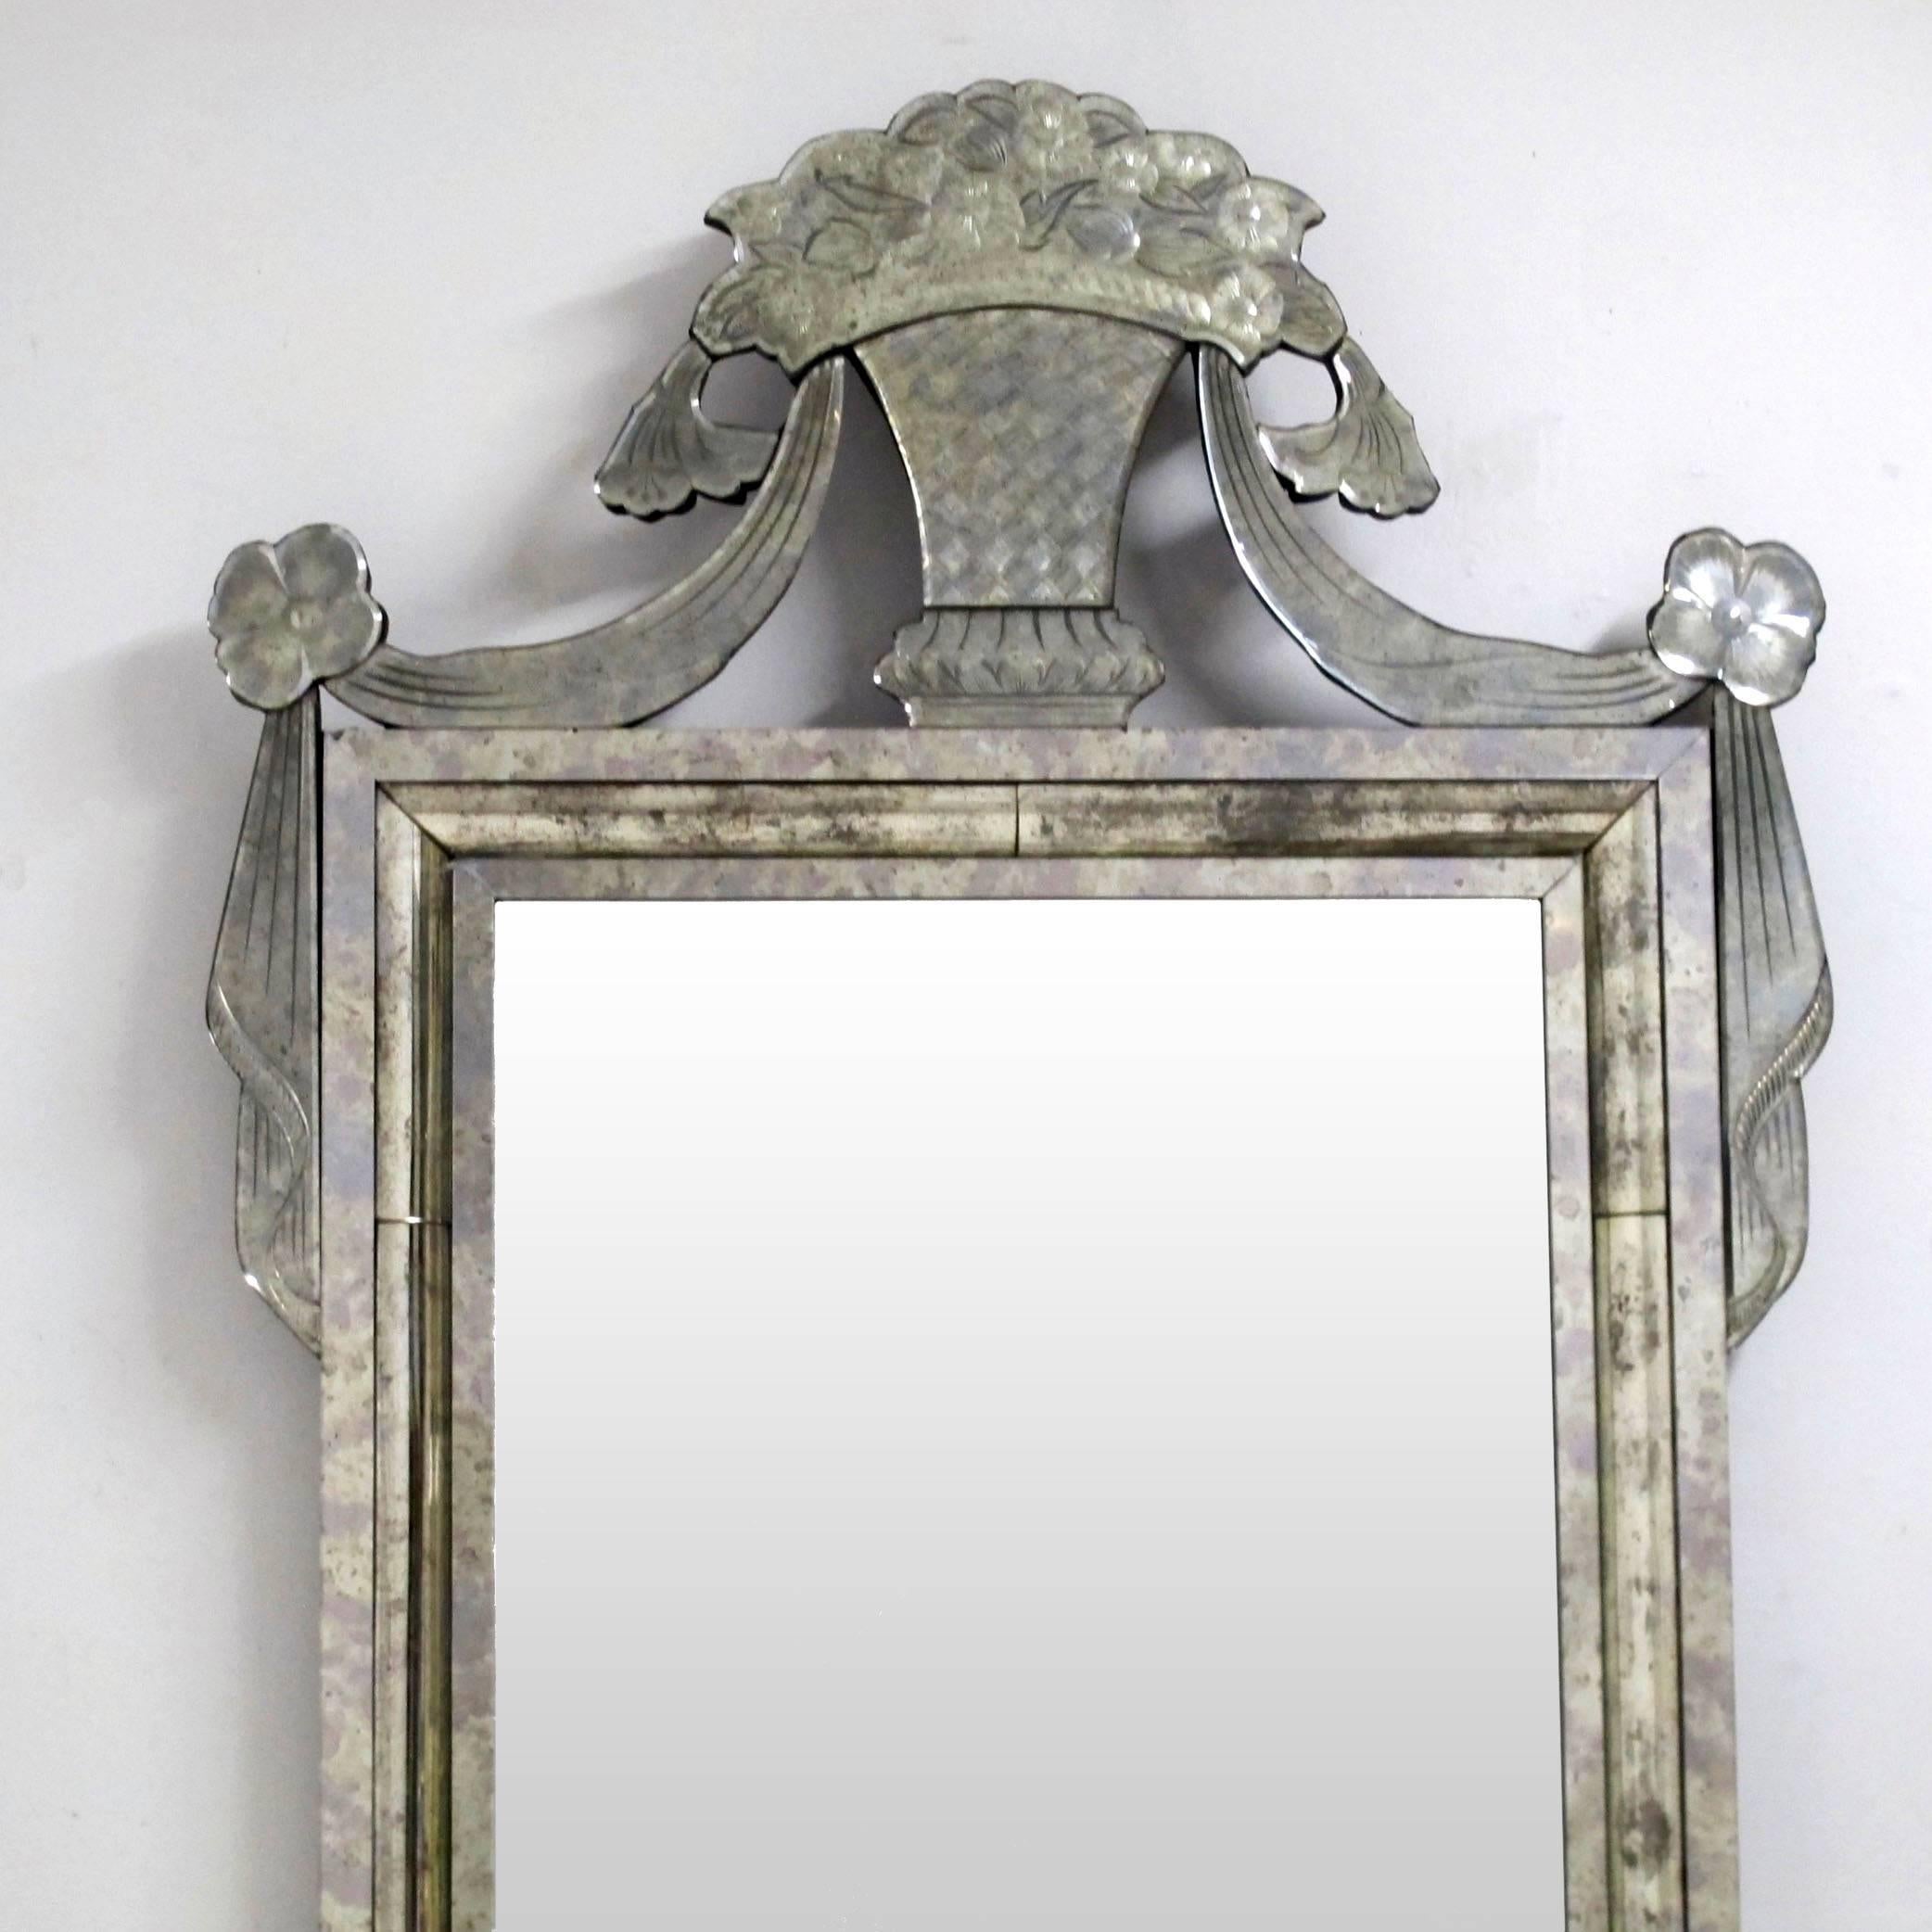 A flamboyant Venetian style mirror with beveled and aged glass frame, having an etched glass flower basket at the top with draped swags. American, 1920s.